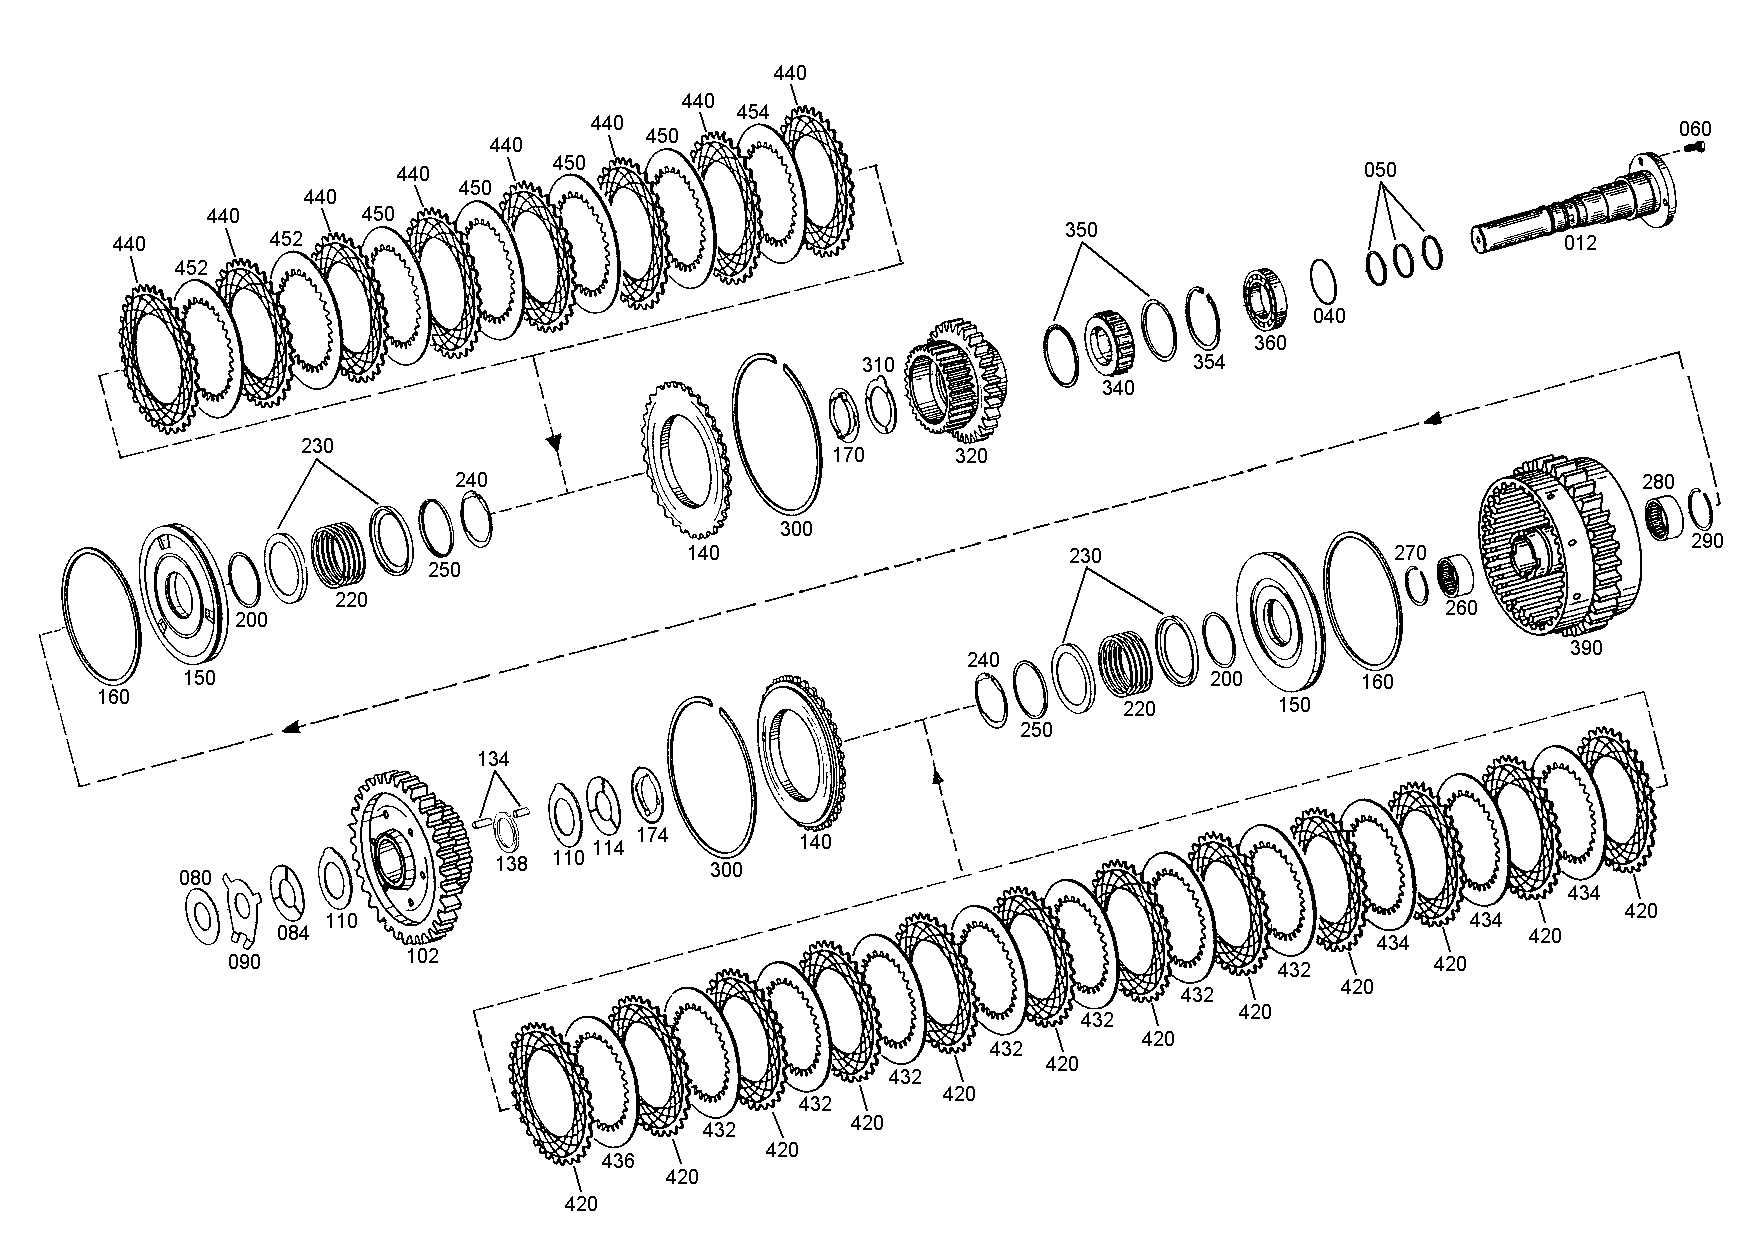 drawing for PPM 8052078 - ANGLE RING (figure 3)